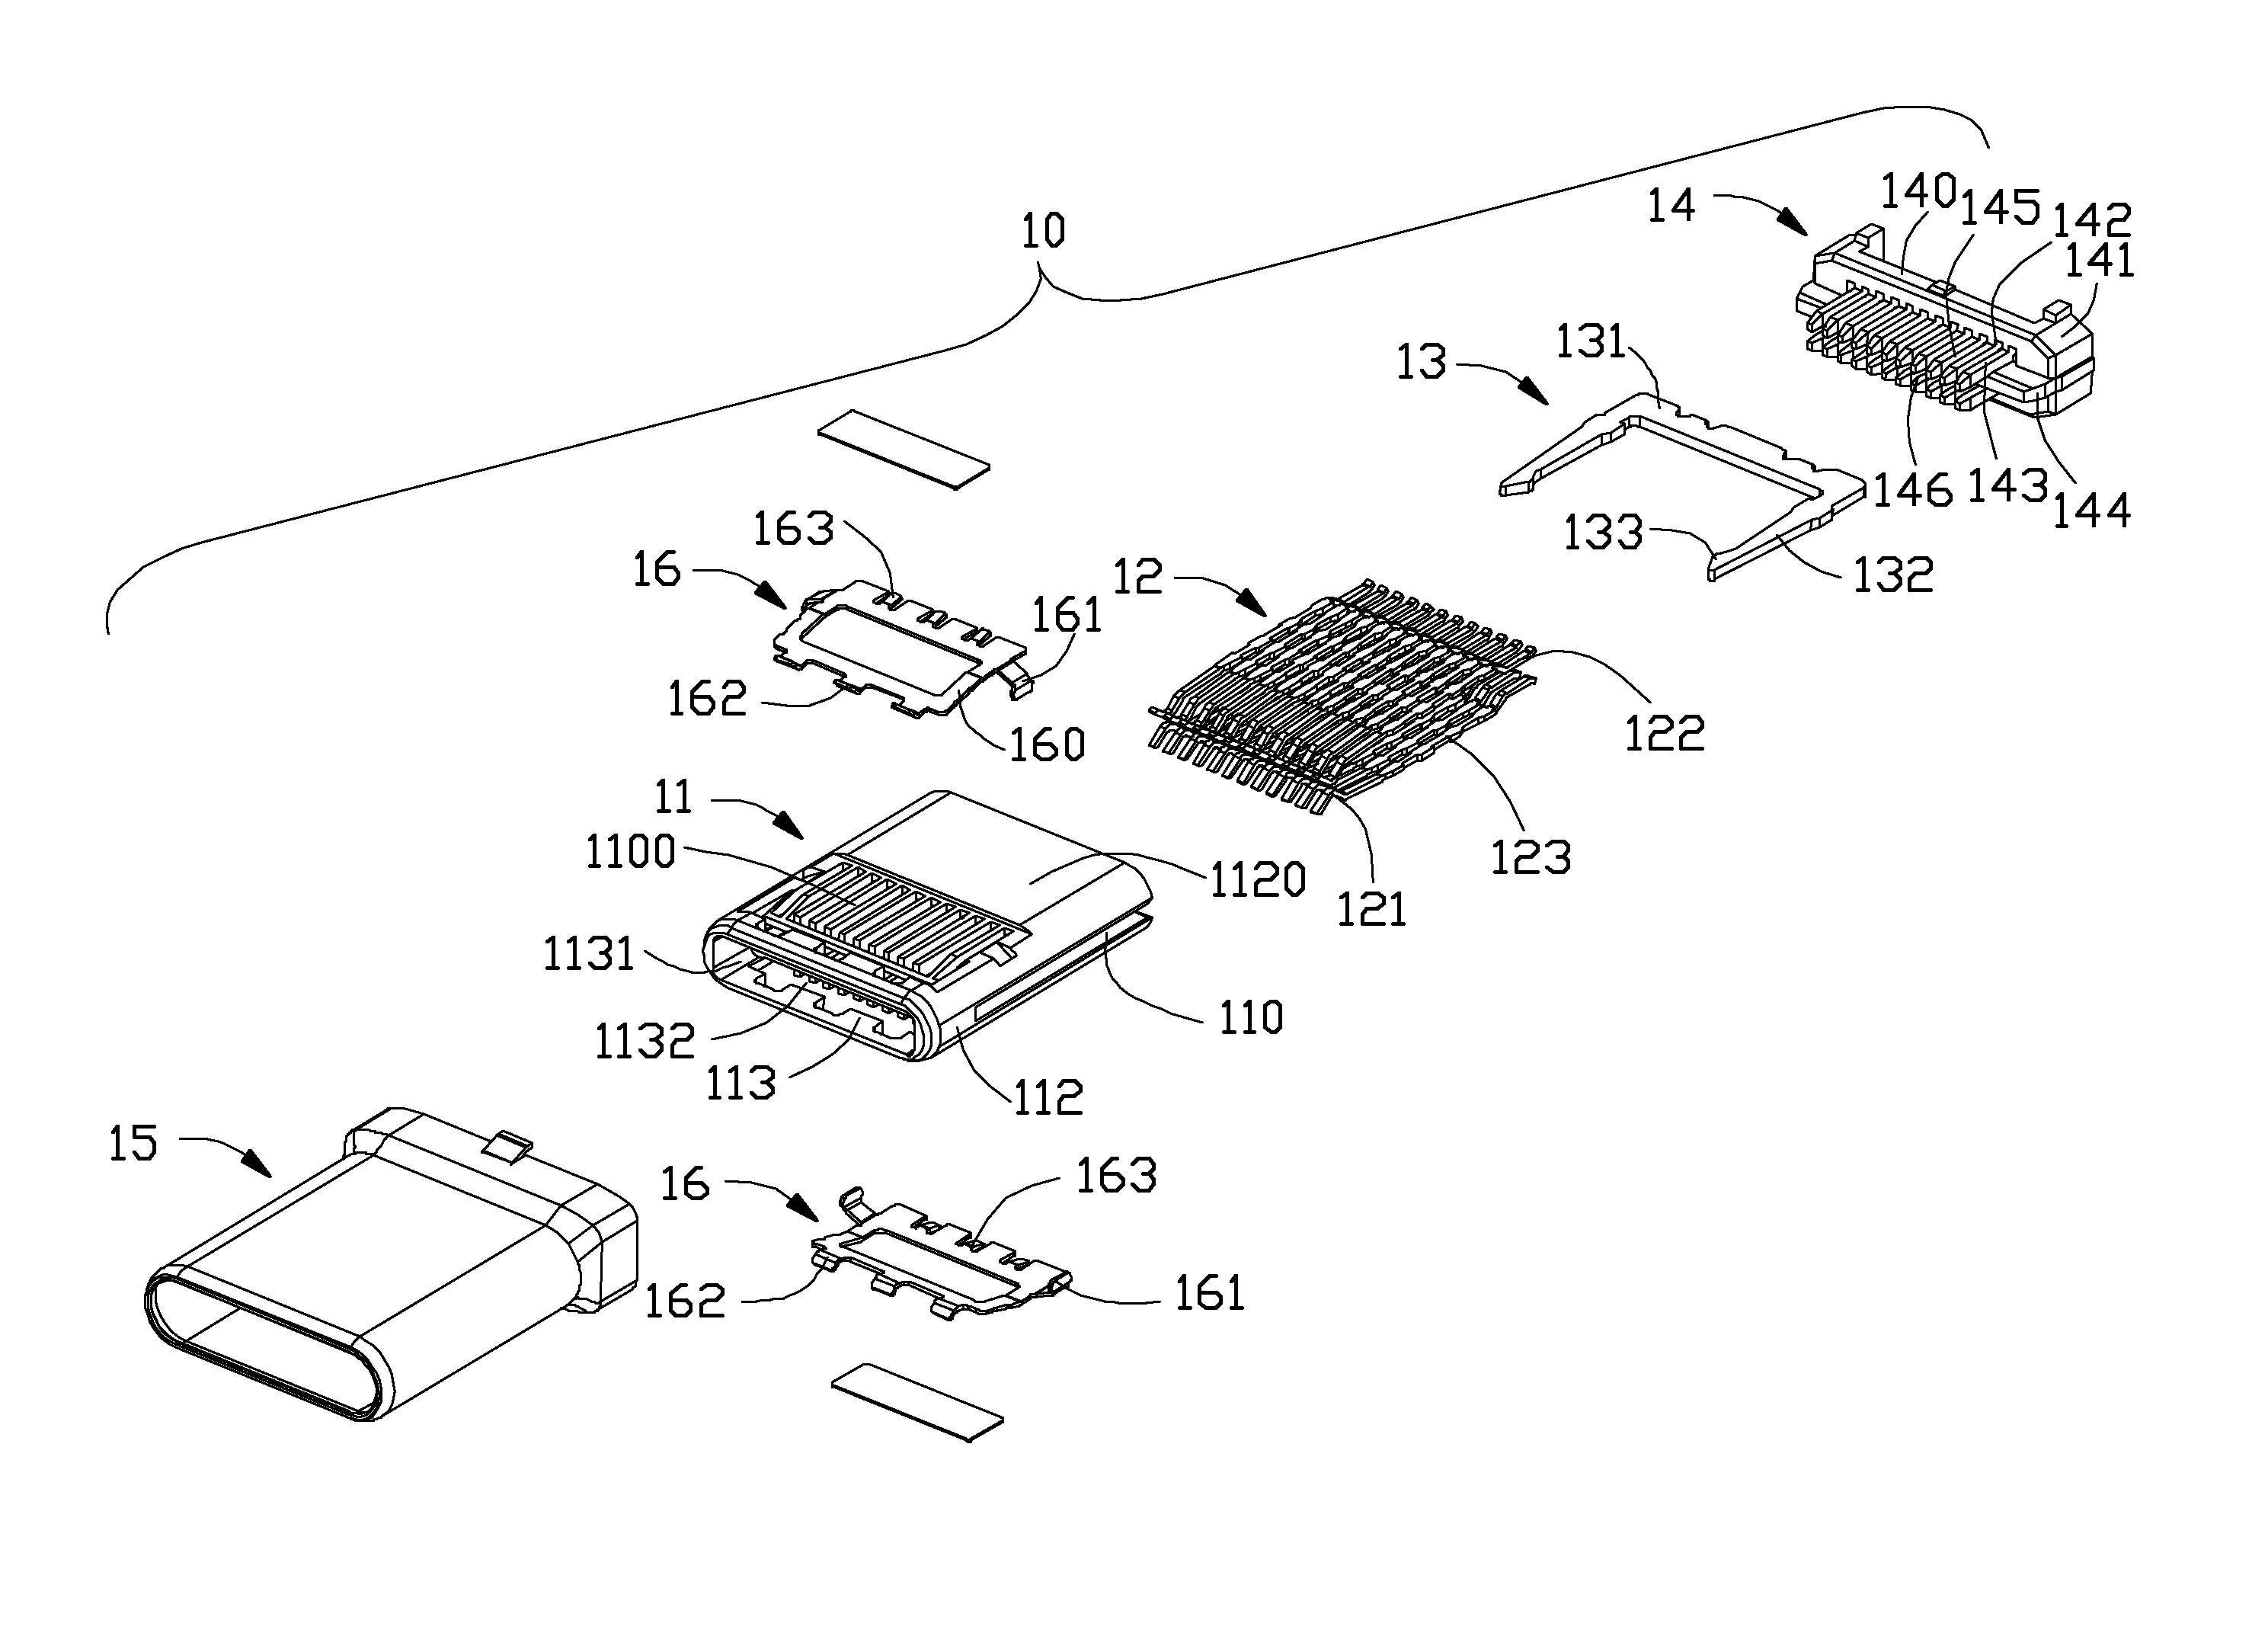 Plug connector assembly having improved anti-EMI performance